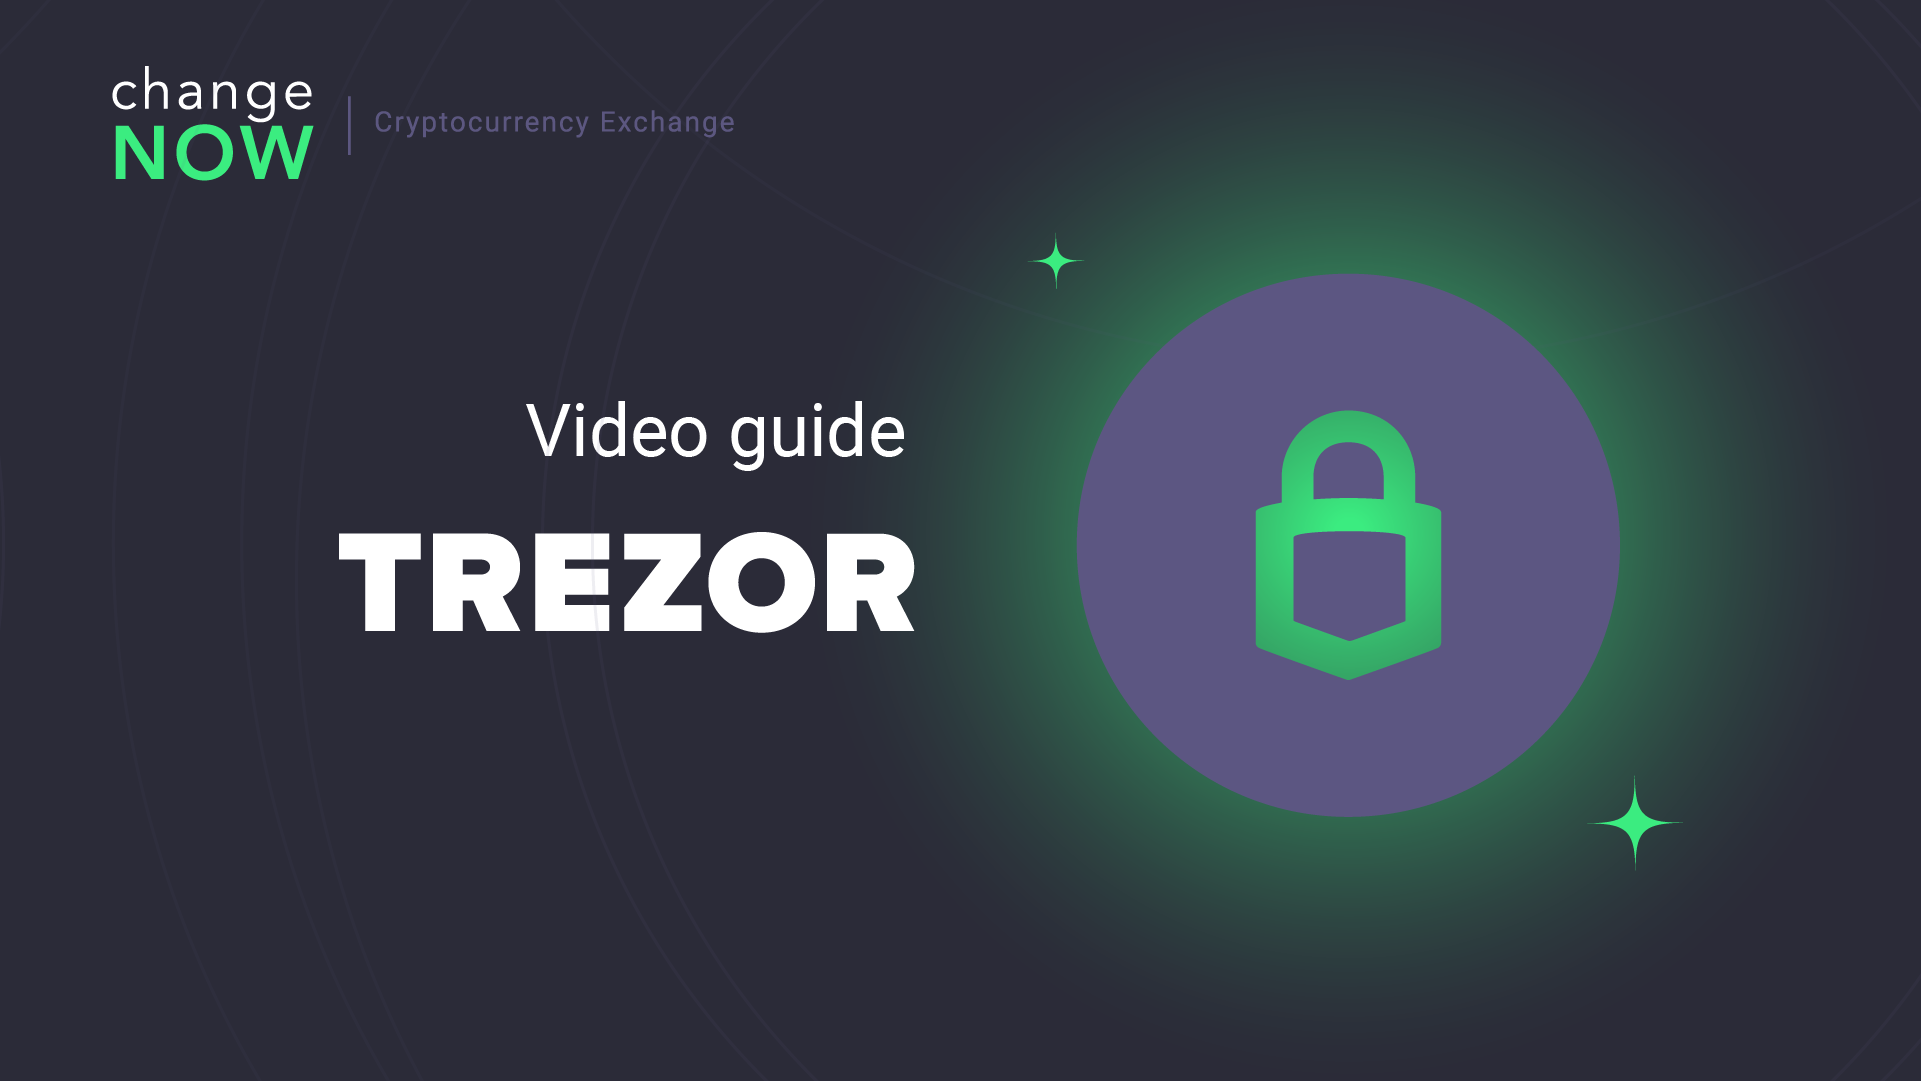 How To Perform A ChangeNOW Exchange In TREZOR Wallet [GUIDE]